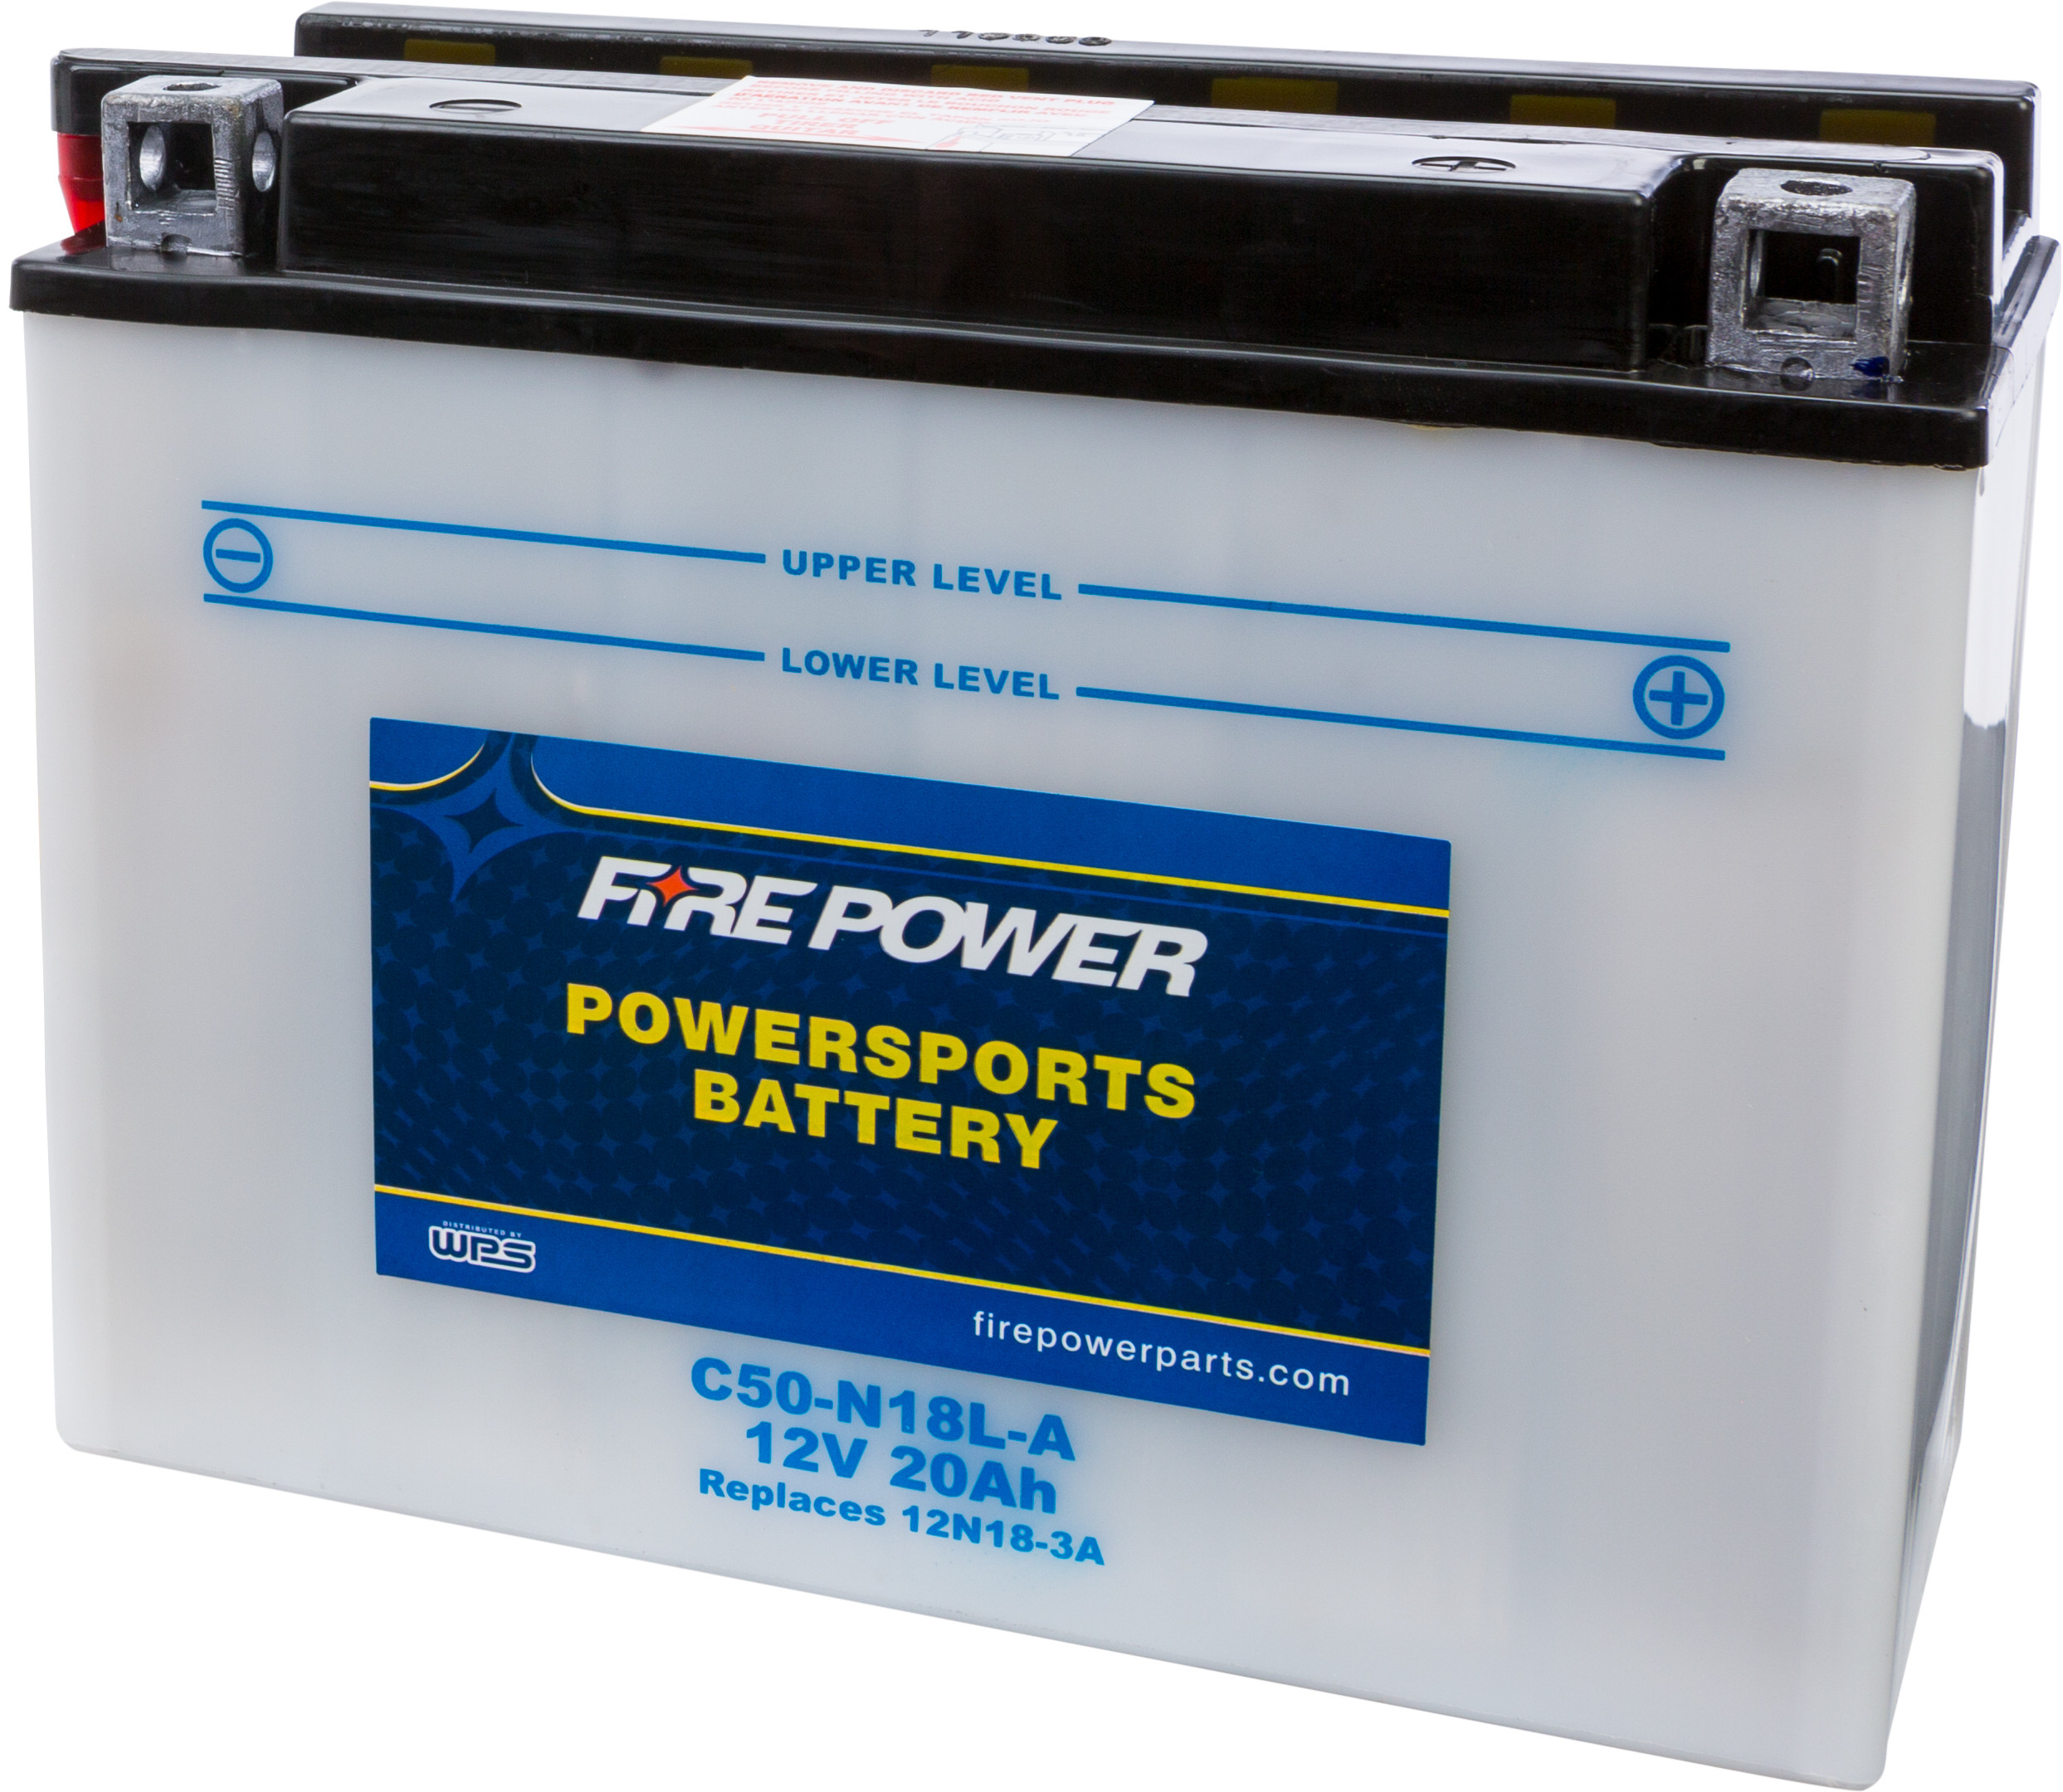 12V Heavy Duty Battery - Replaces Y50-N18L-A - Click Image to Close